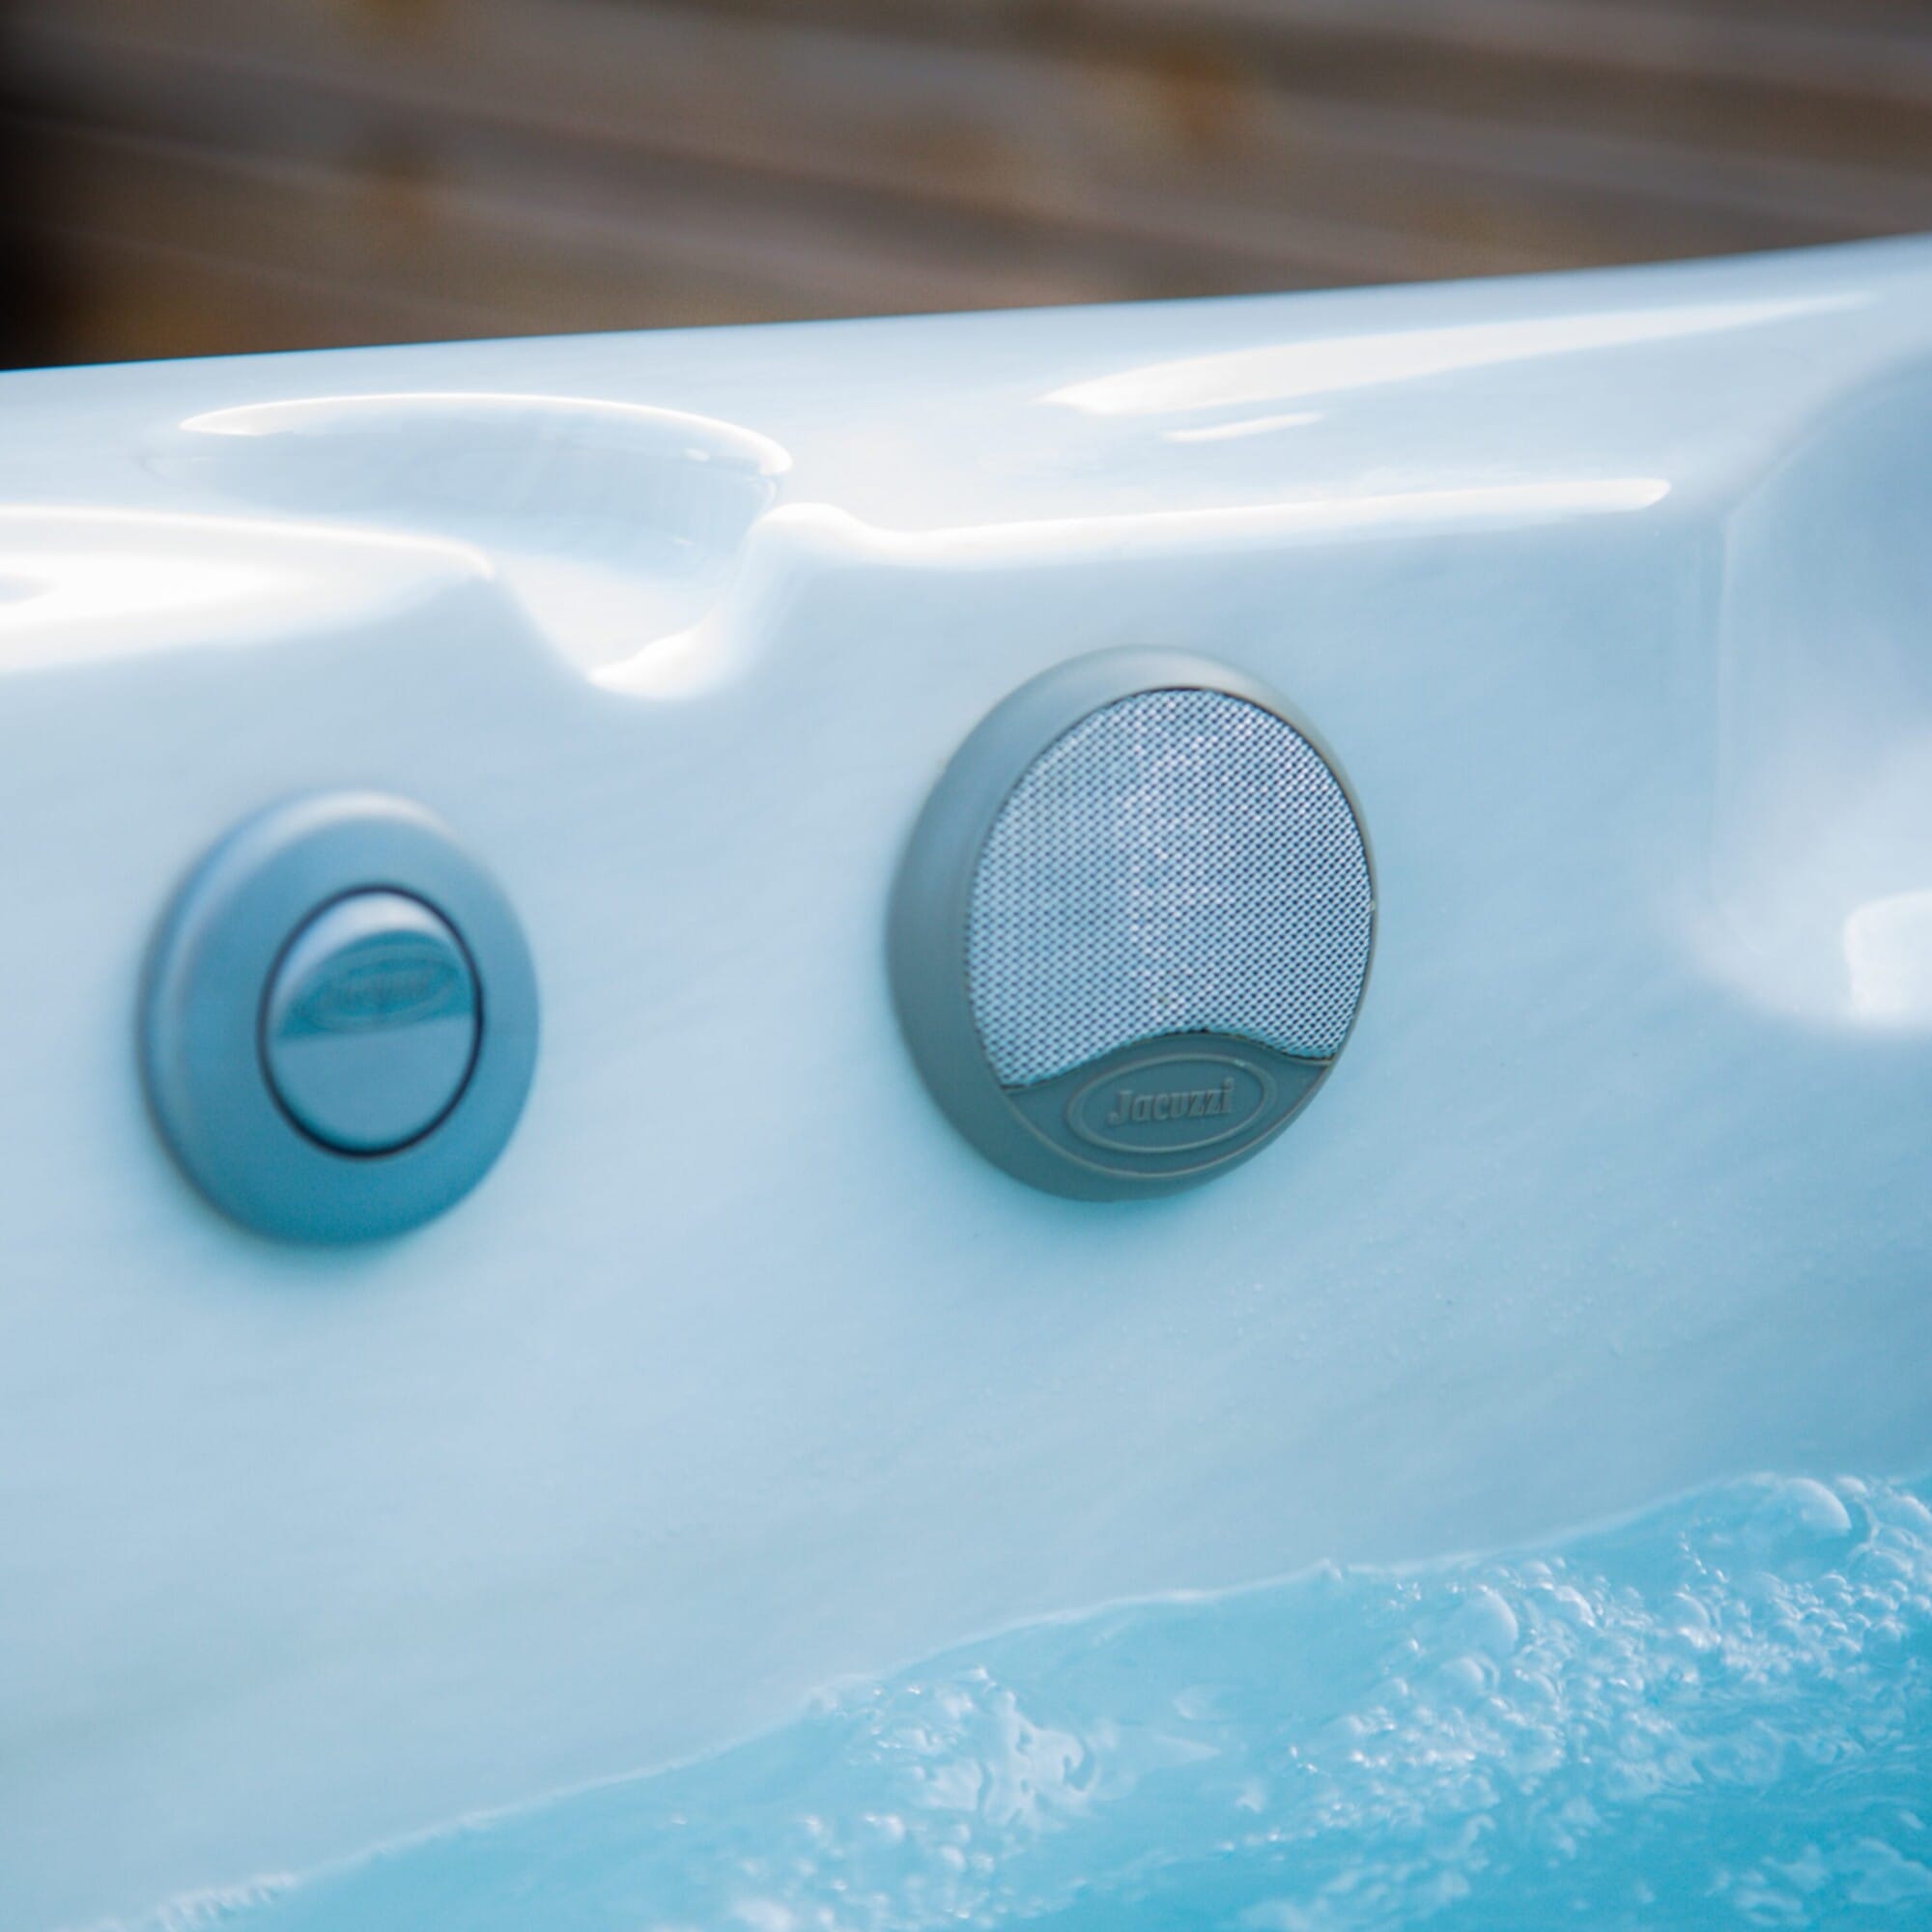 Jacuzzi J-315 hot tub for sale